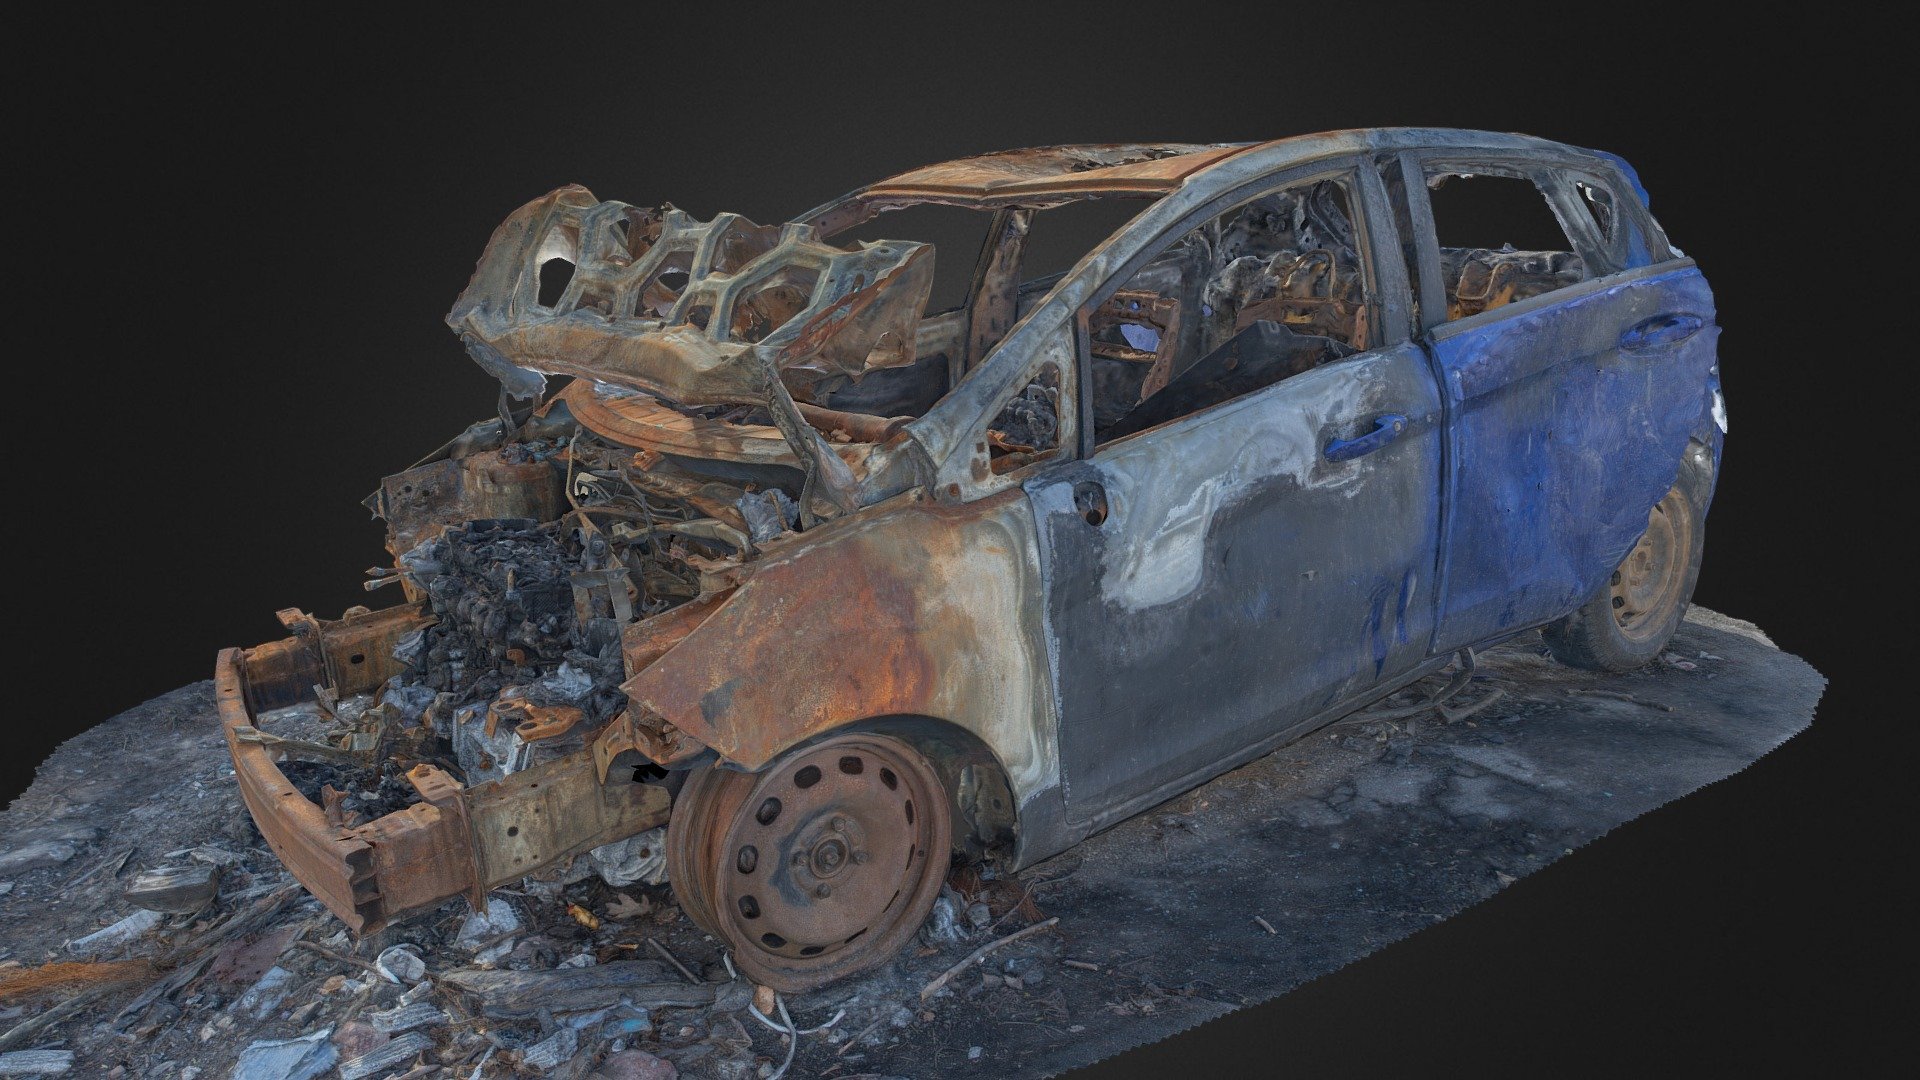 3D scan of a burned blue car. 
Front completely destroyed, back part somewhat intact. 
With normal map 3d model